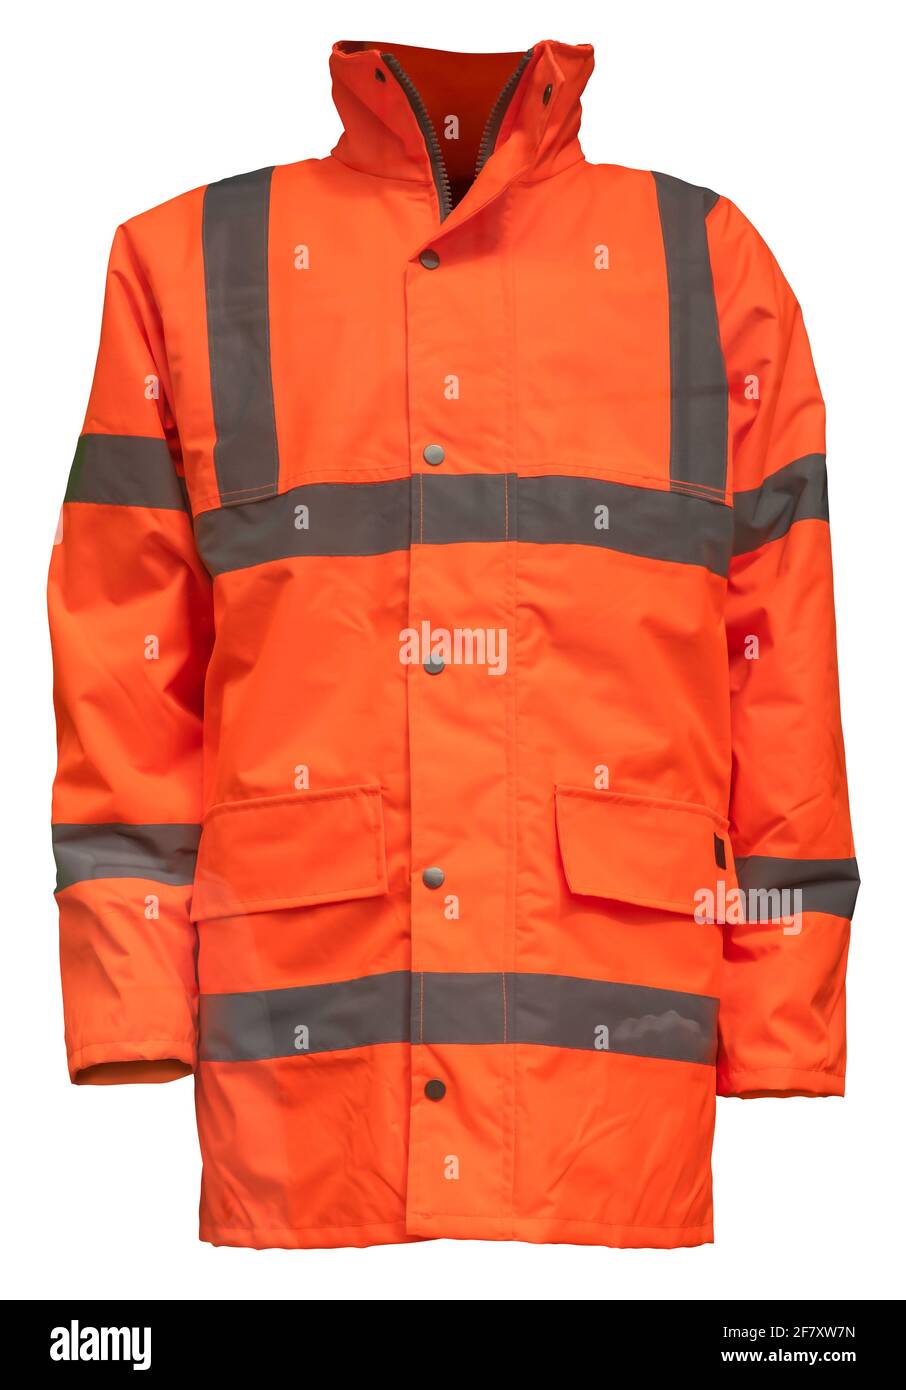 An Orange High Visibility (Hi Vis) Safety Jacket, Isolated On A White Background Stock Photo